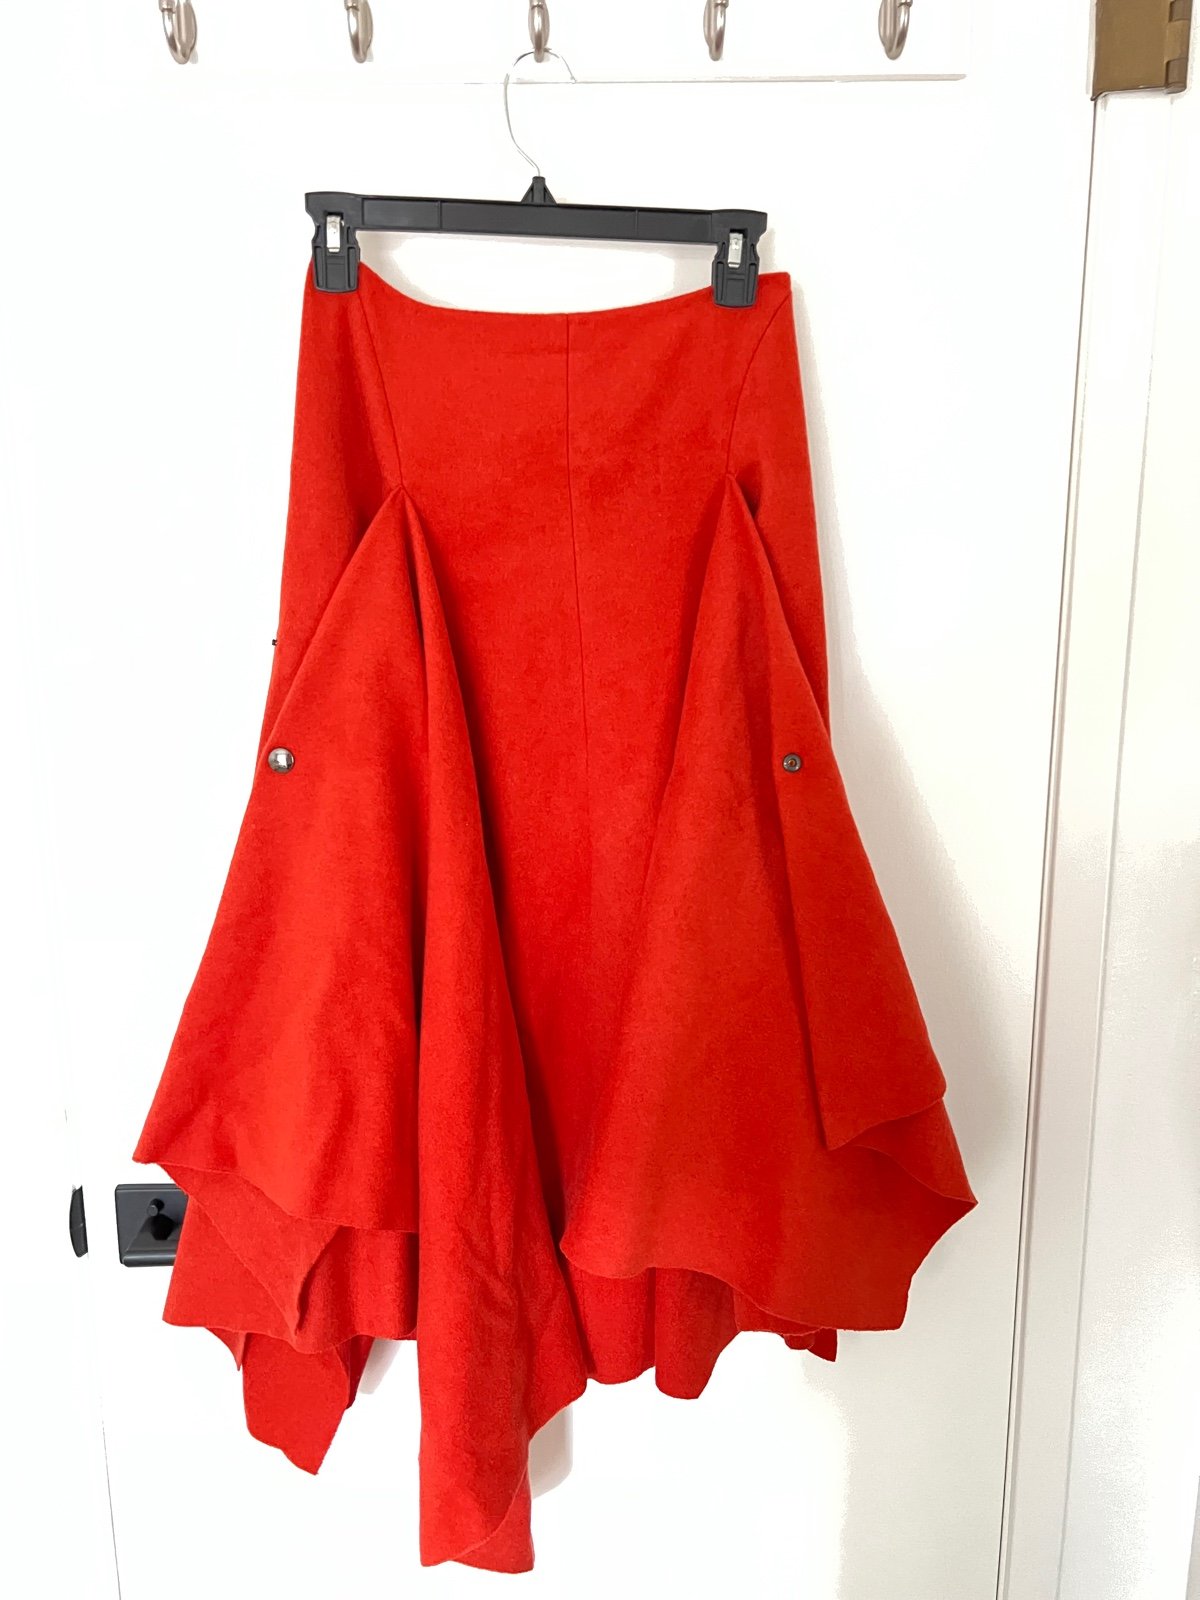 Special offer  Sportmax flared wool skirt lqqcE6xNs Eve